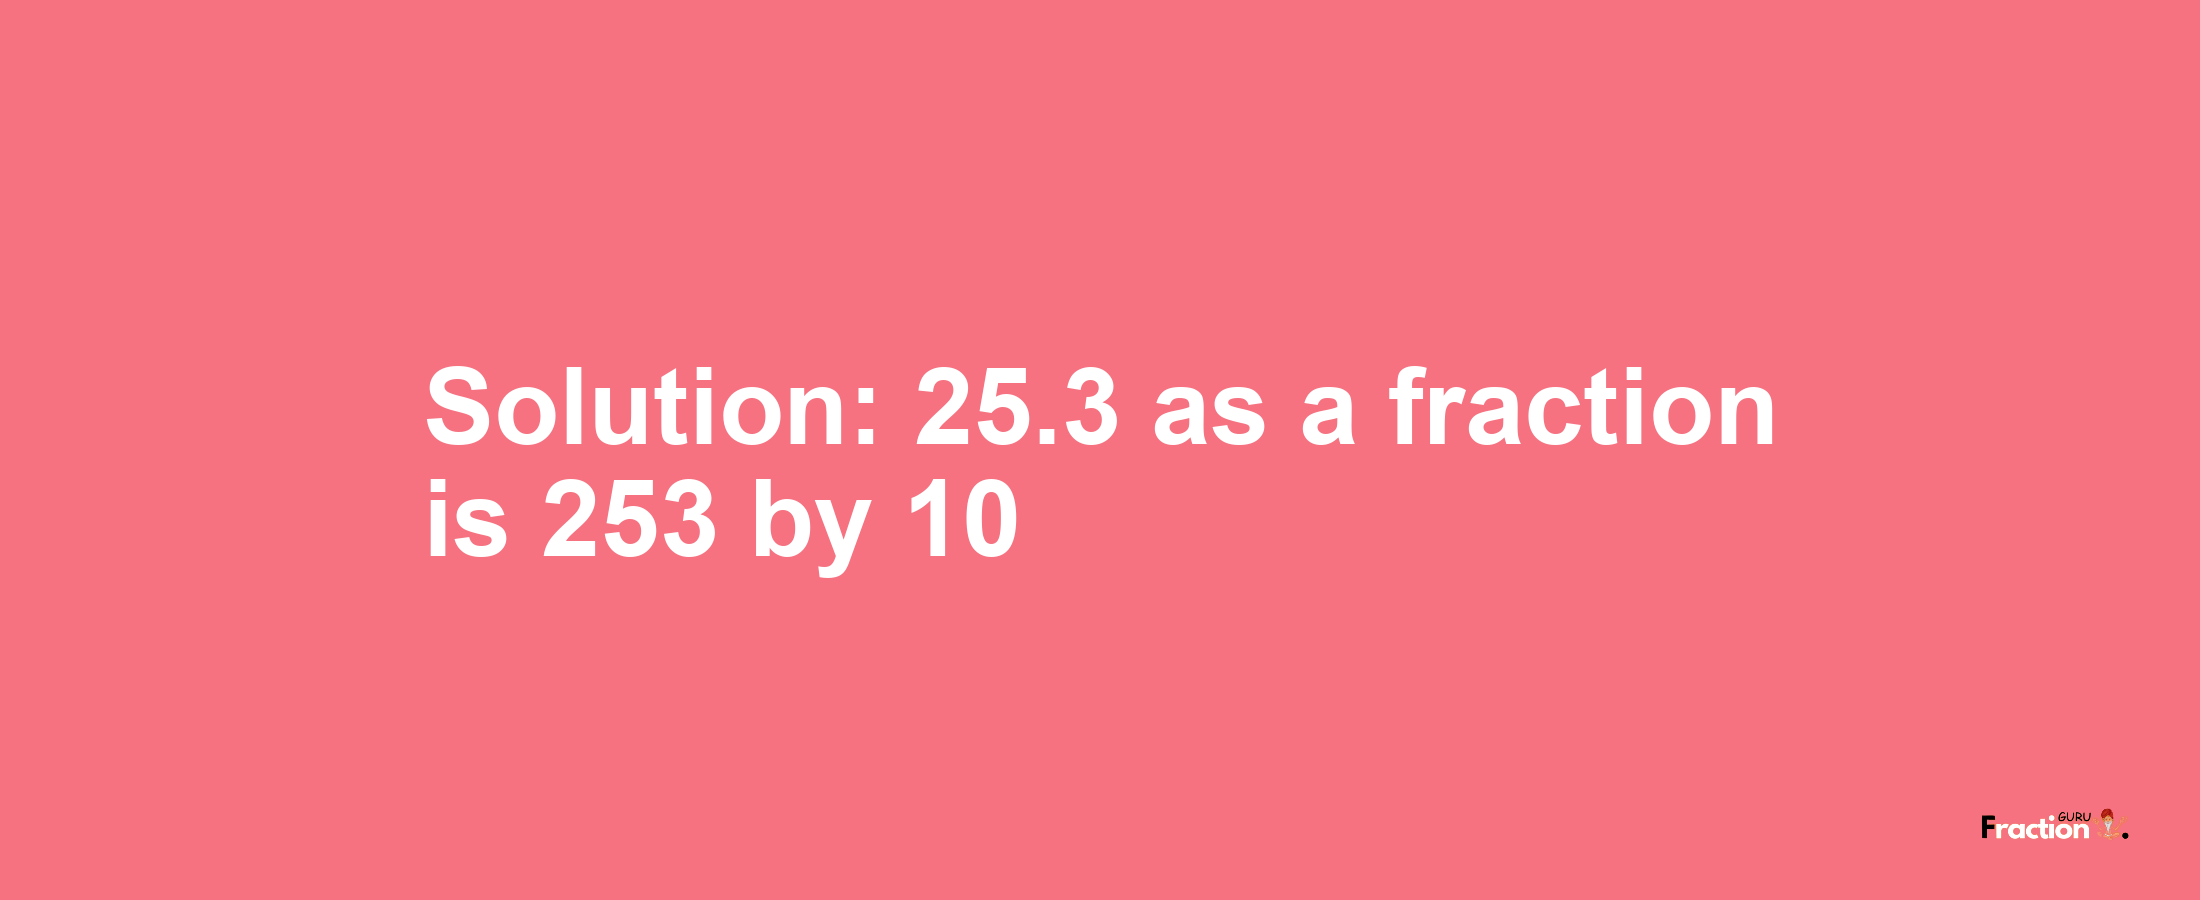 Solution:25.3 as a fraction is 253/10